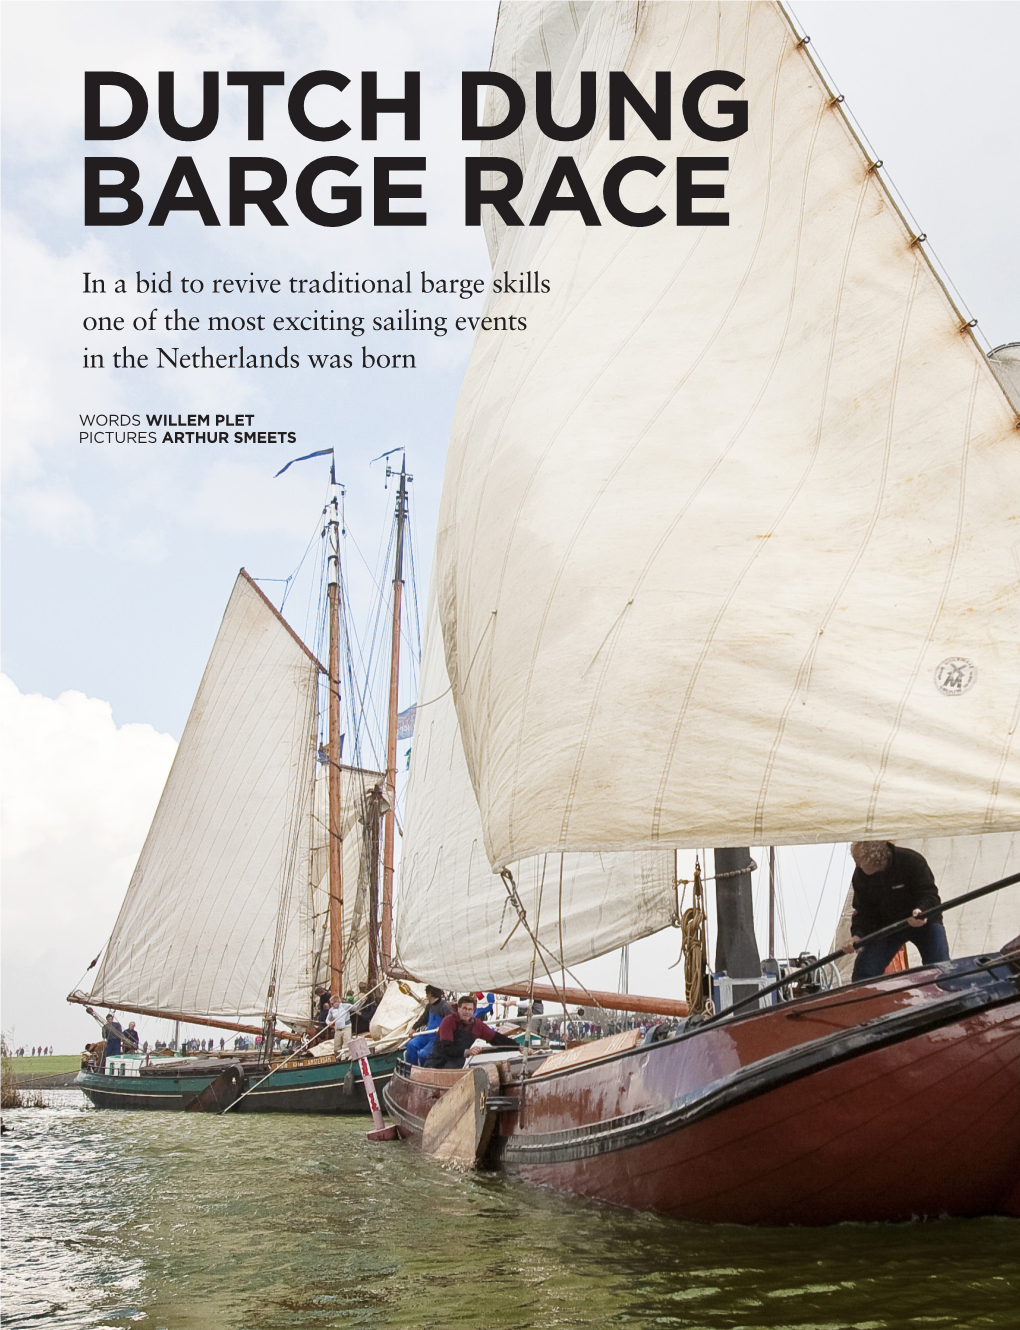 DUTCH DUNG BARGE RACE in a Bid to Revive Traditional Barge Skills One of the Most Exciting Sailing Events in the Netherlands Was Born